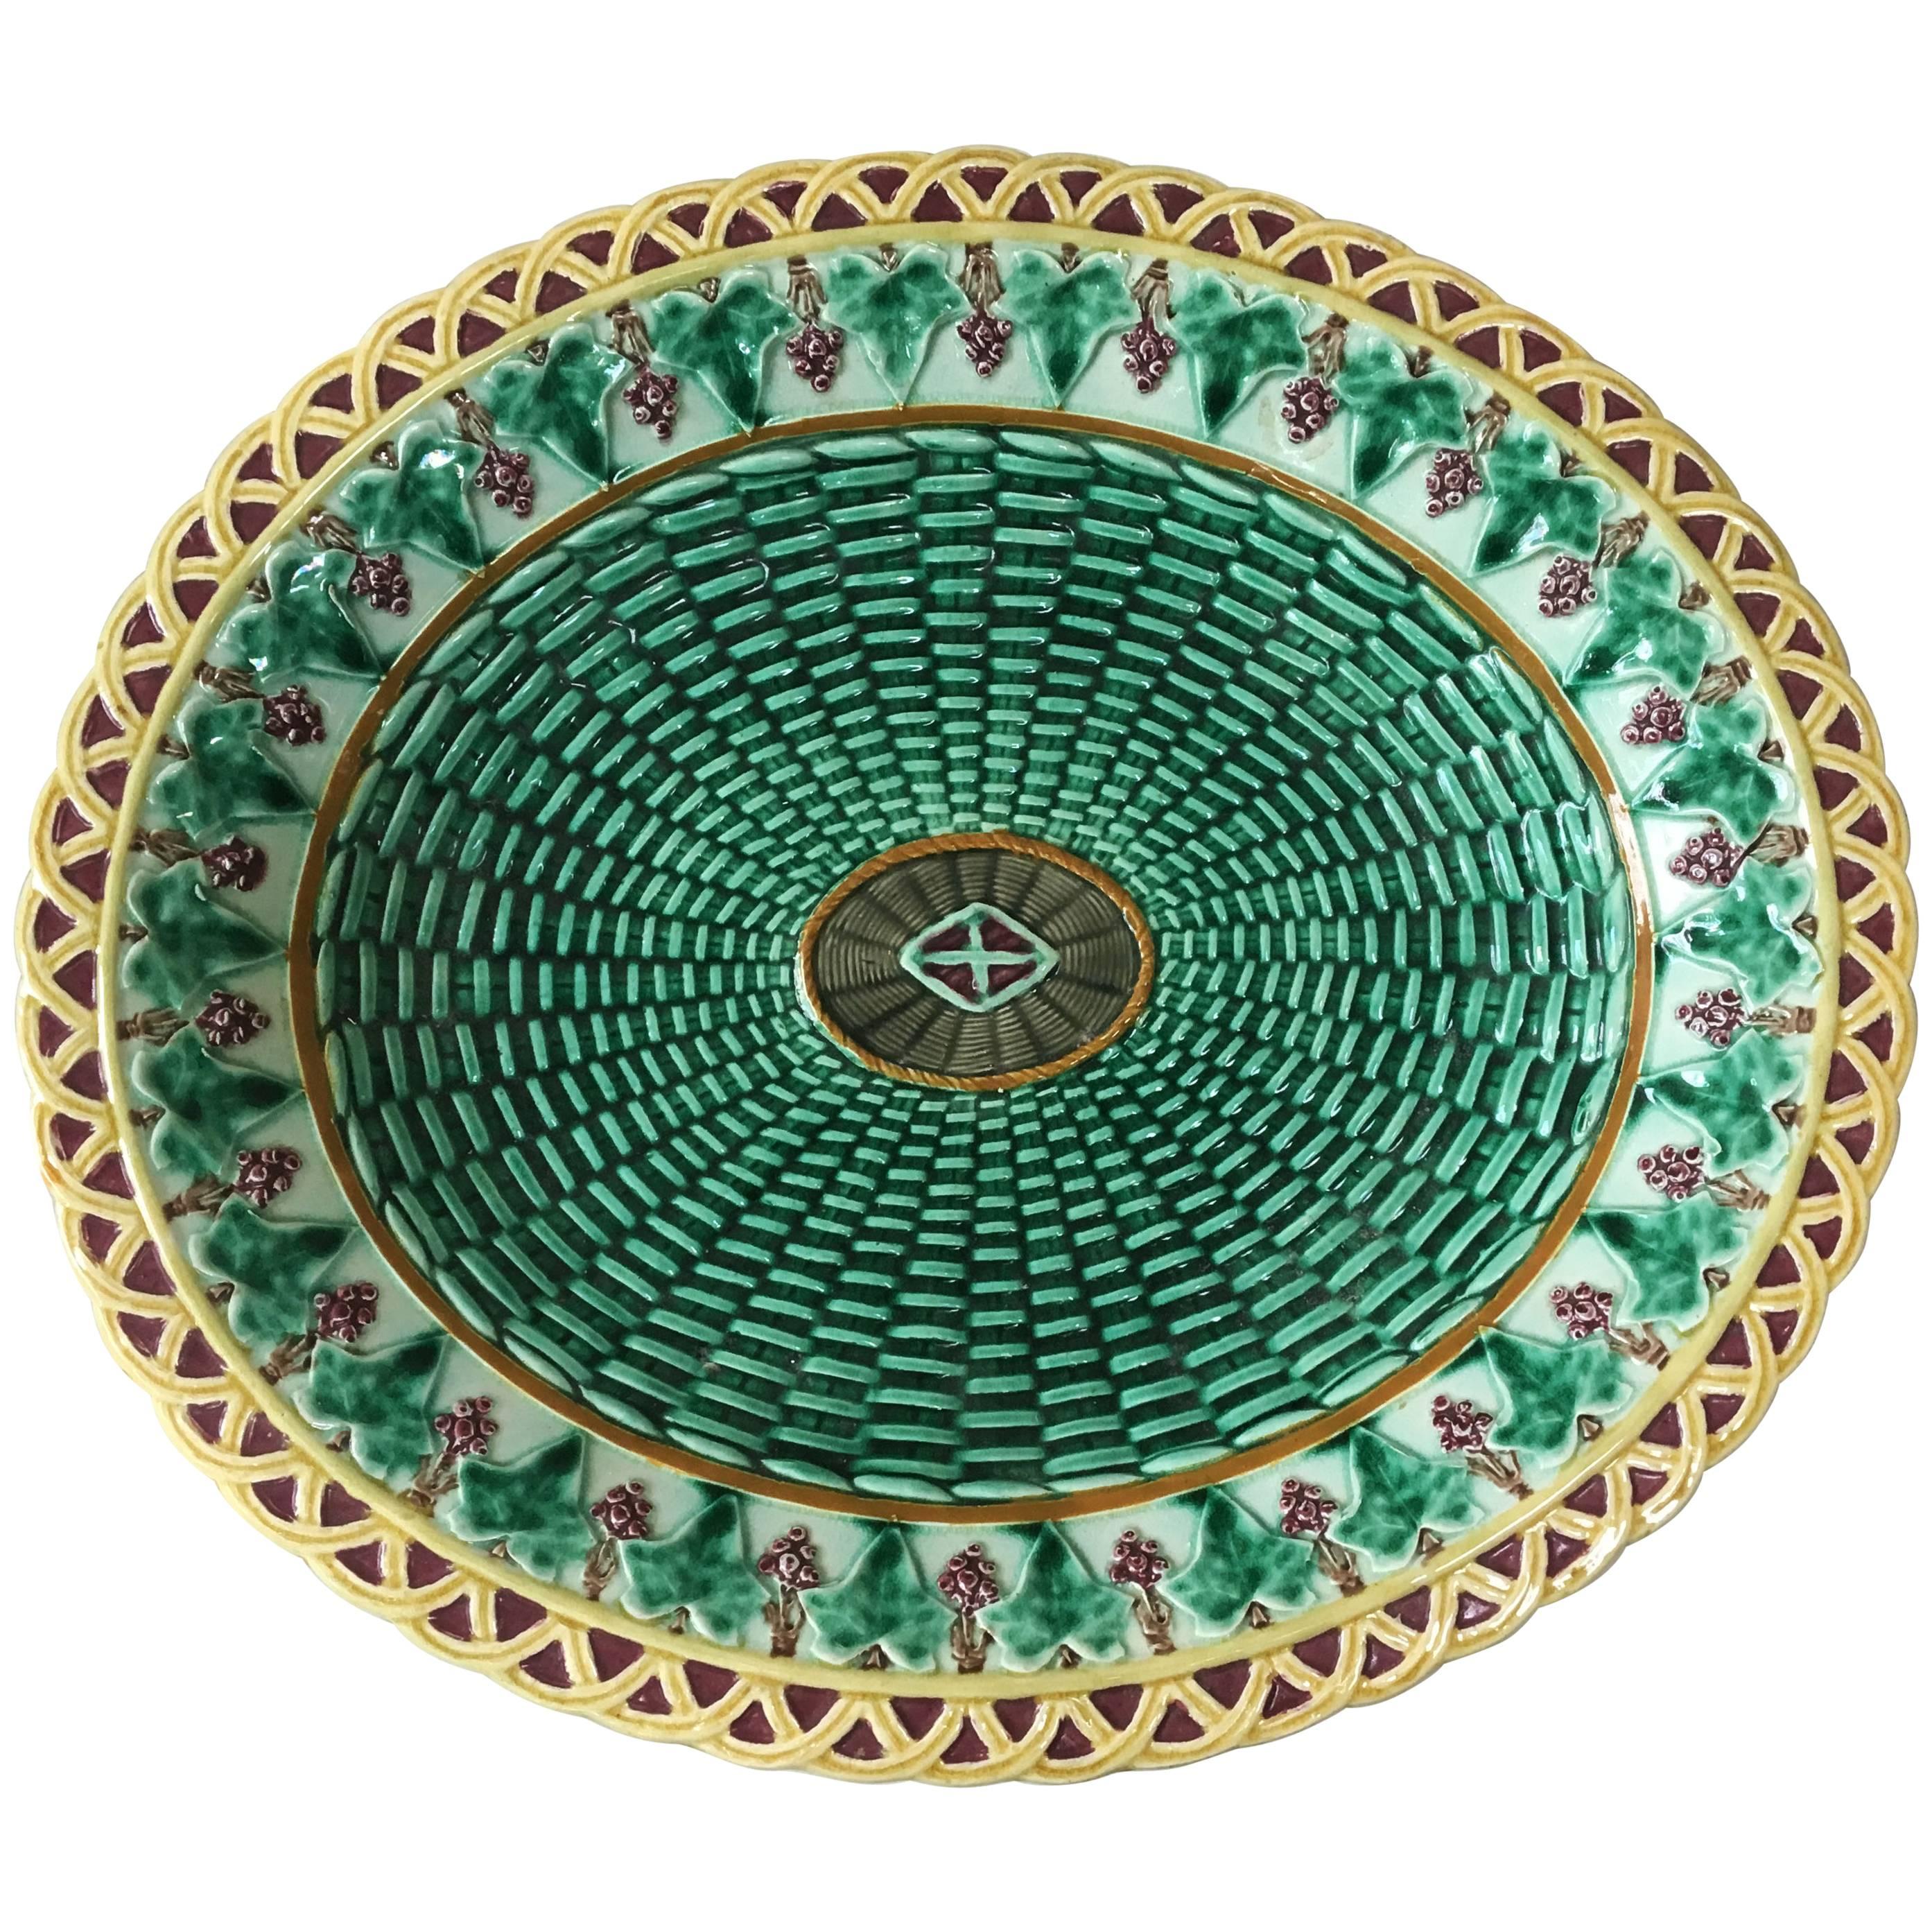 English Majolica Wicker and Ivy Leaves Platter Wedgwood